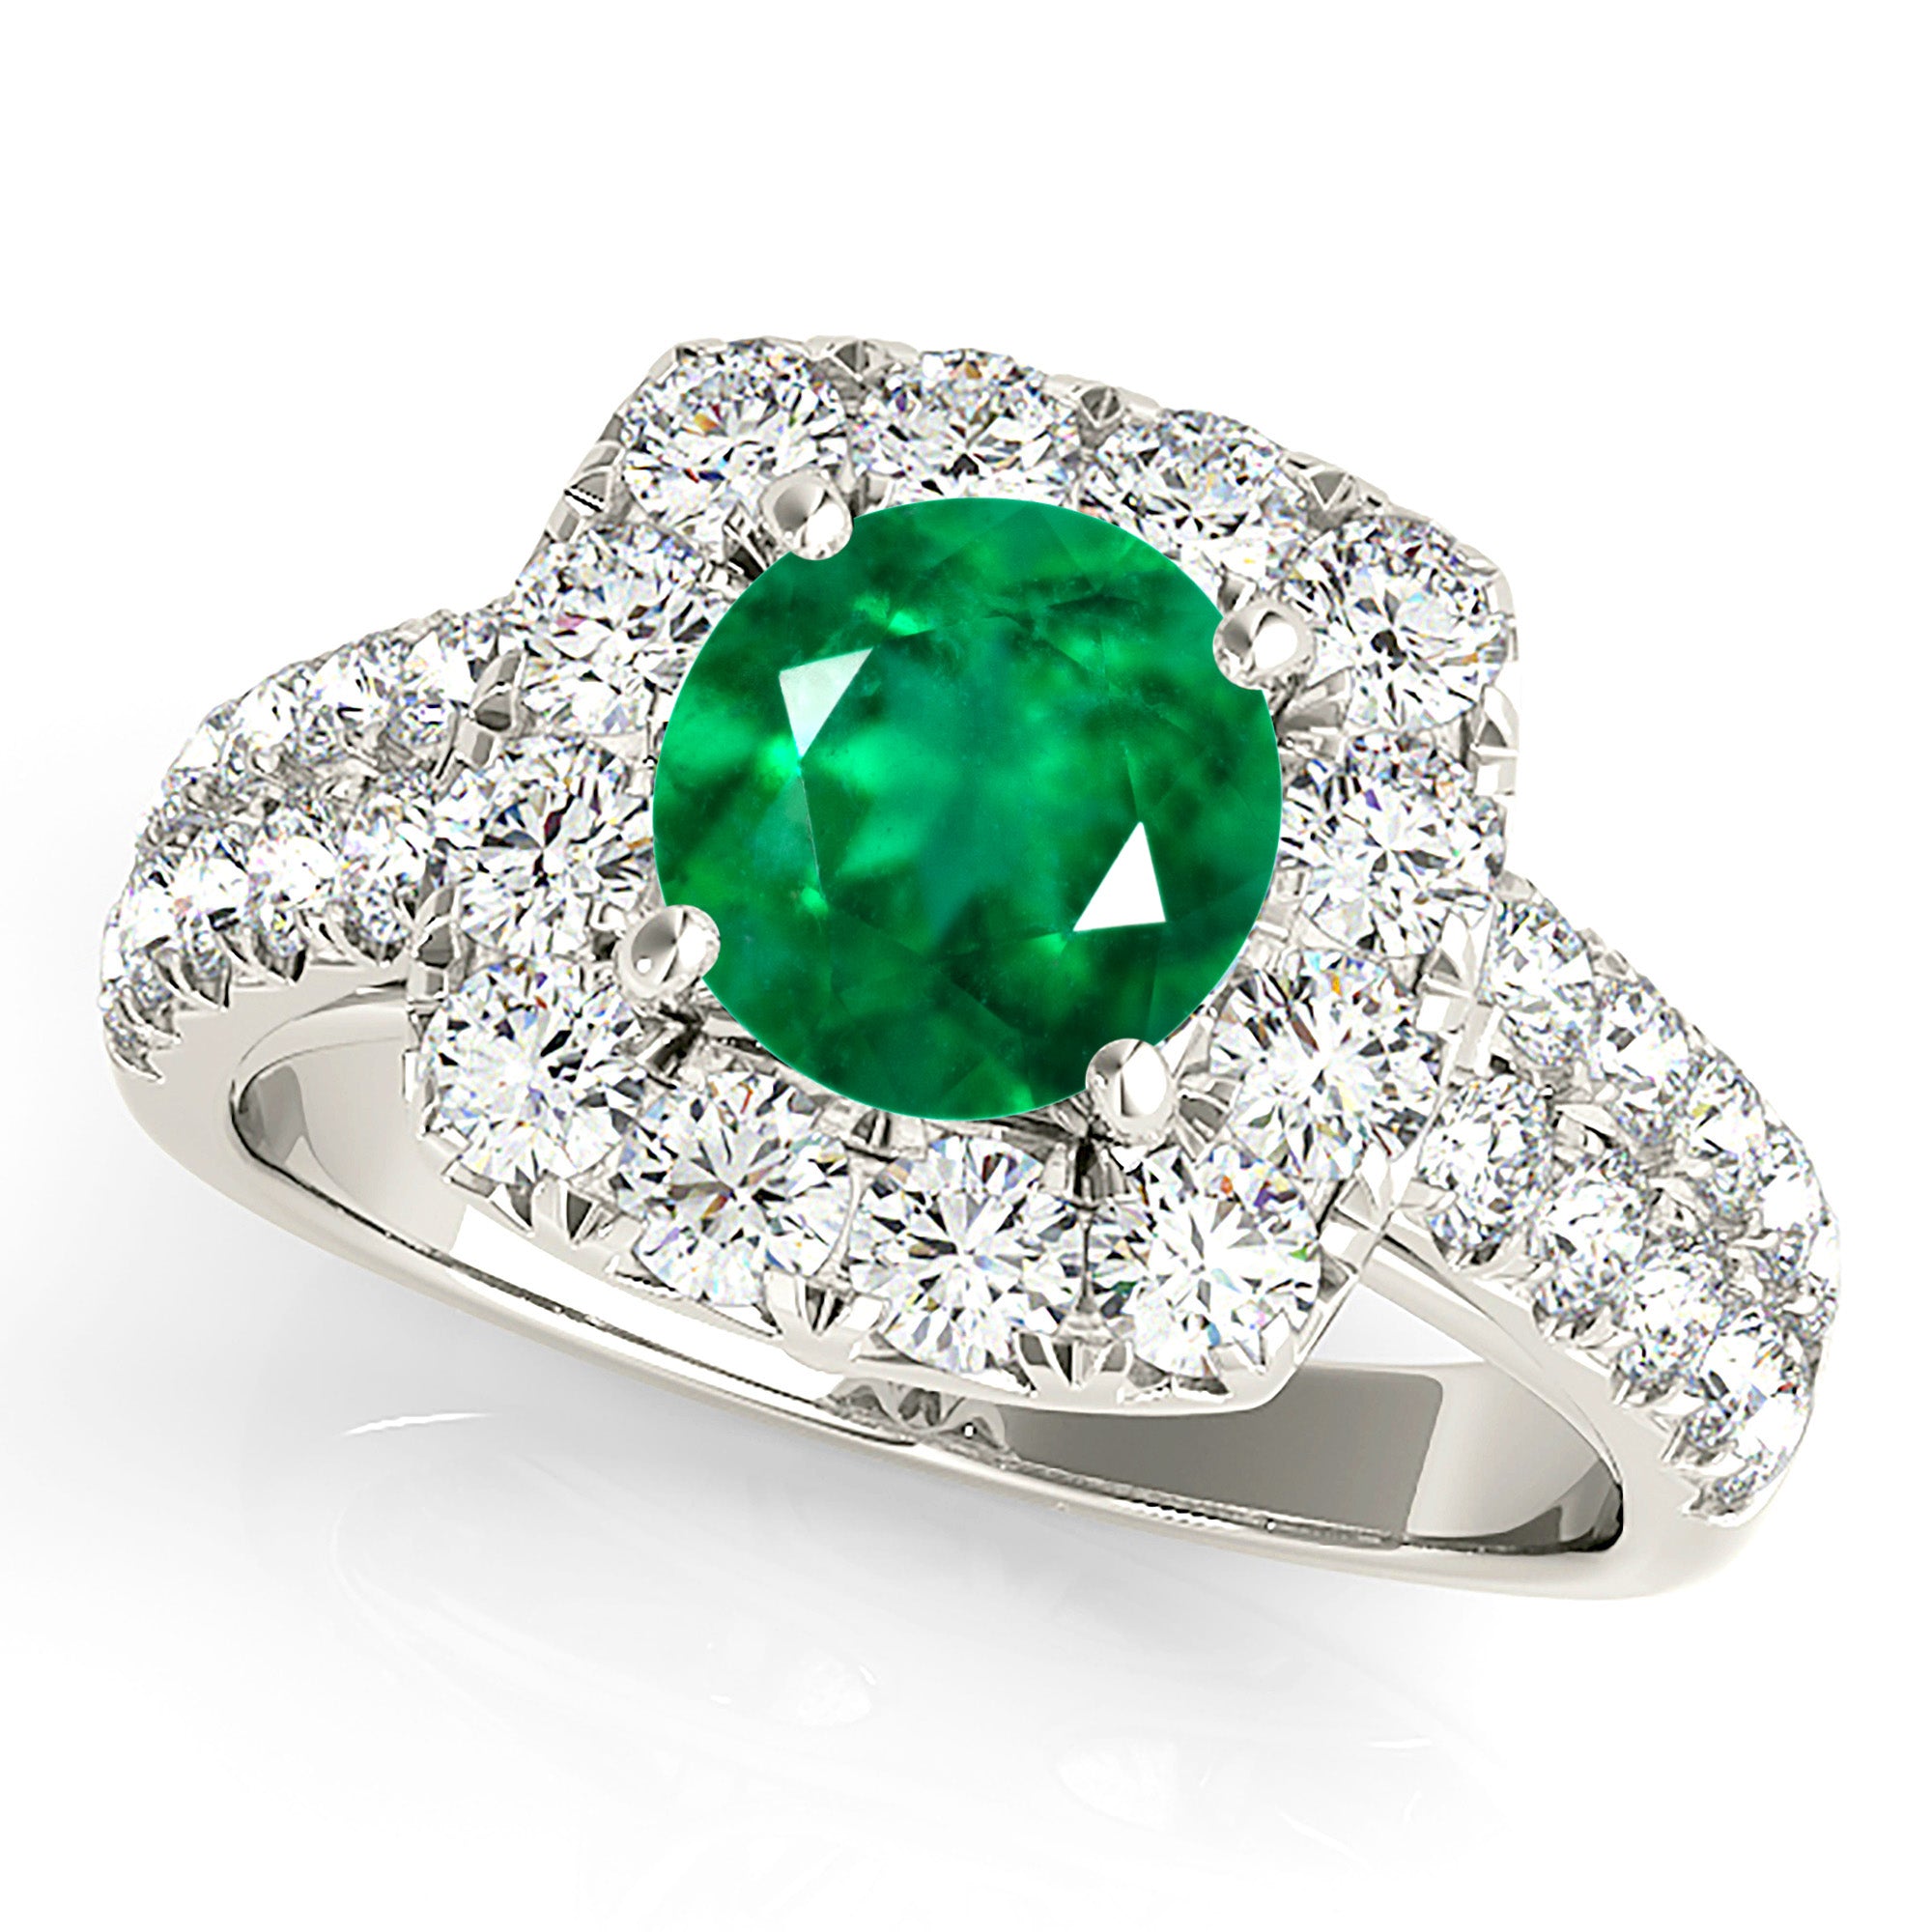 2.00 ct. Genuine Emerald Halo Ring With 1.00 ctw. Double Row Side Diamonds-in 14K/18K White, Yellow, Rose Gold and Platinum - Christmas Jewelry Gift -VIRABYANI